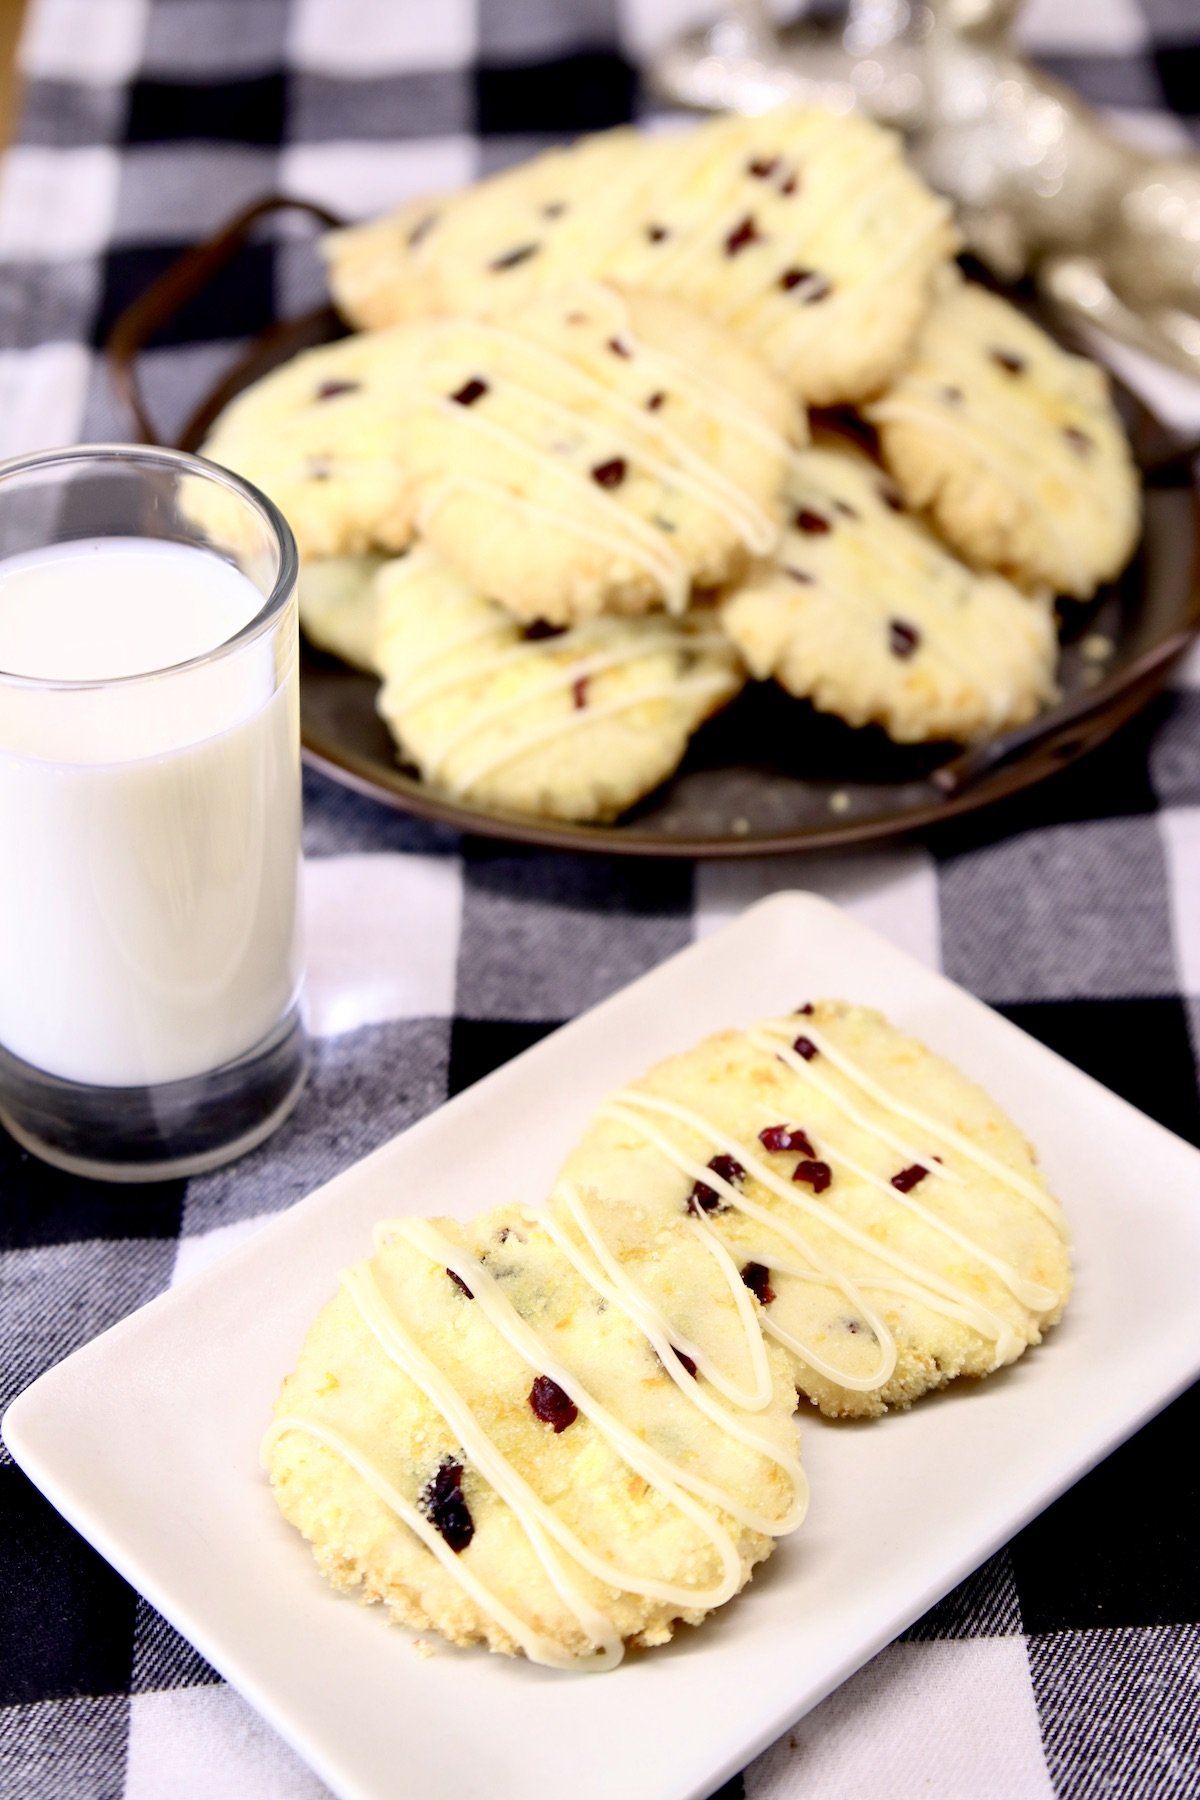 plate with 2 cranberry cookies, glass of milk, platter of cookies